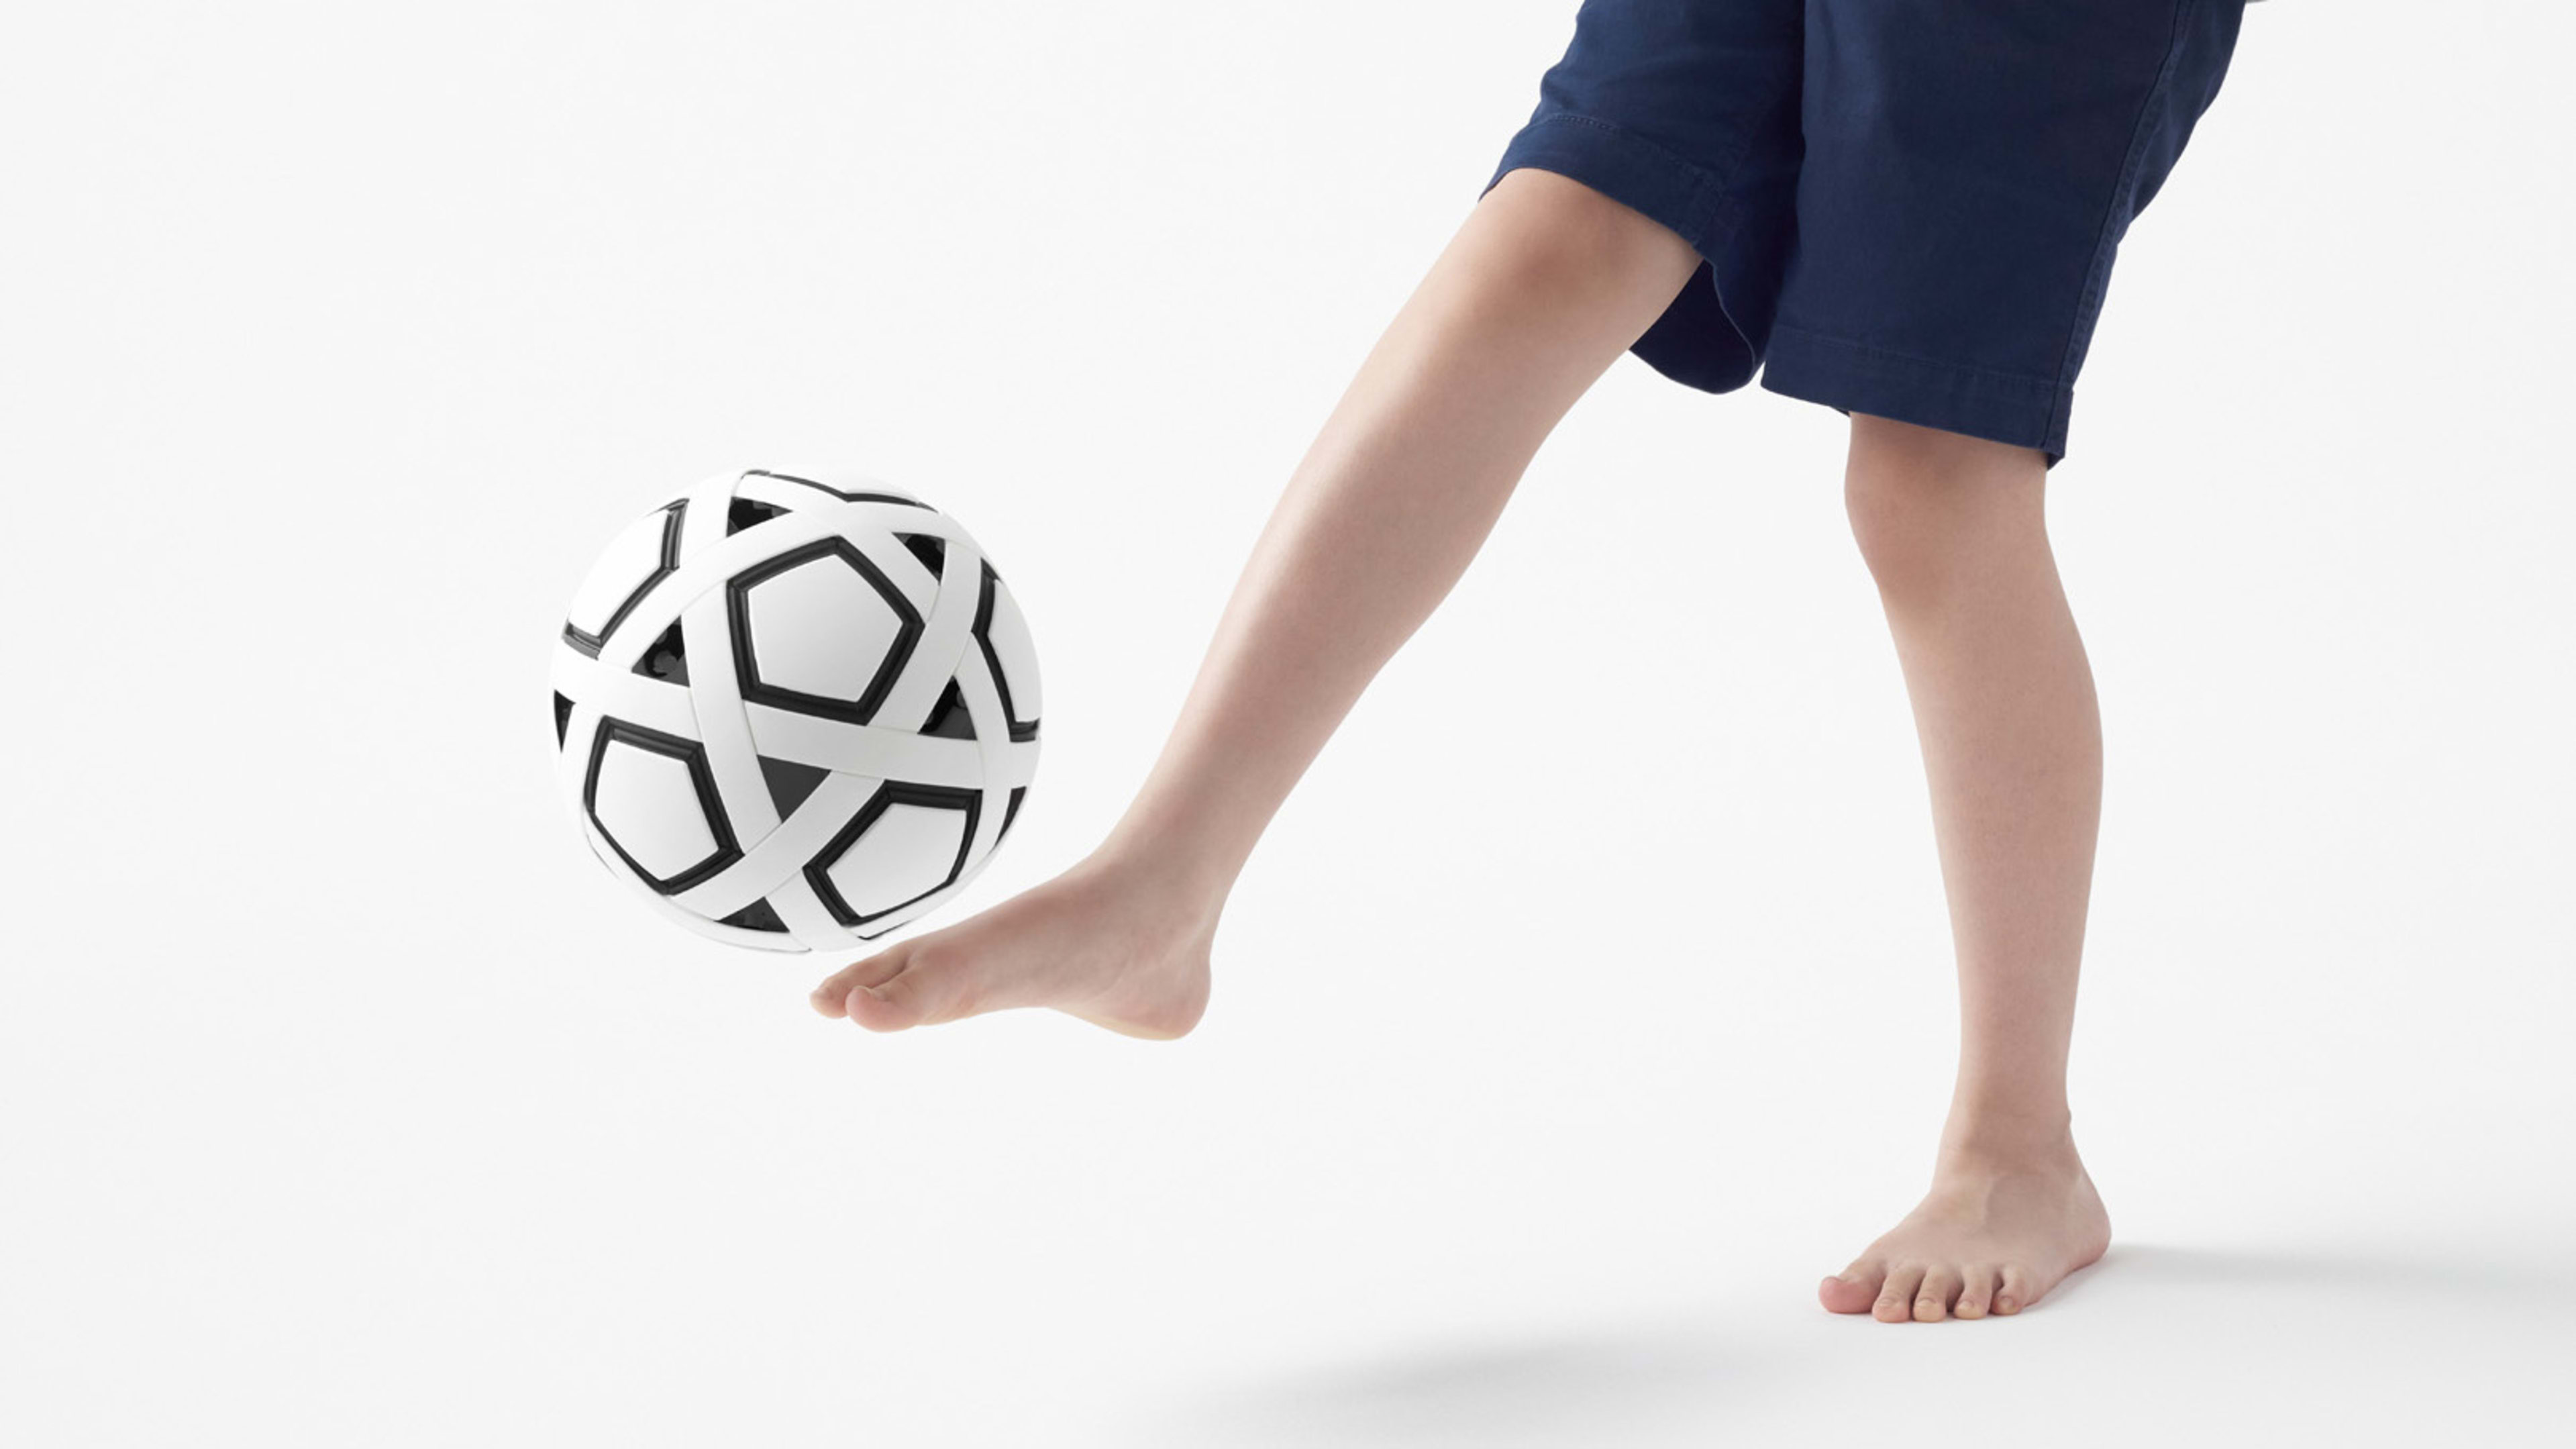 The soccer ball gets a radical redesign